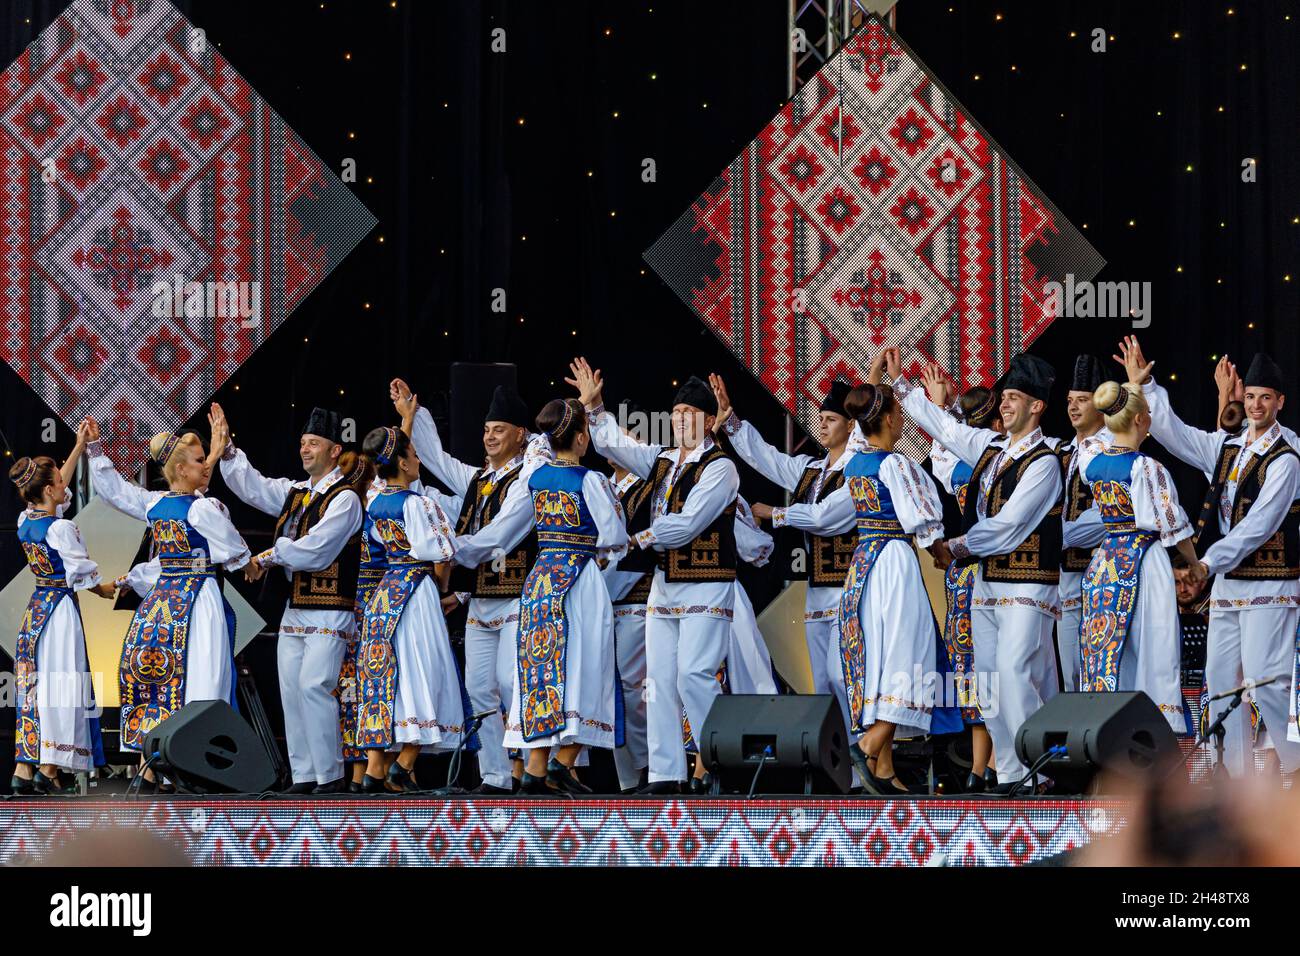 Romanian People in folkloric dress at the folkloric festival in Sibiu in Romania, August 07, 2021 Stock Photo